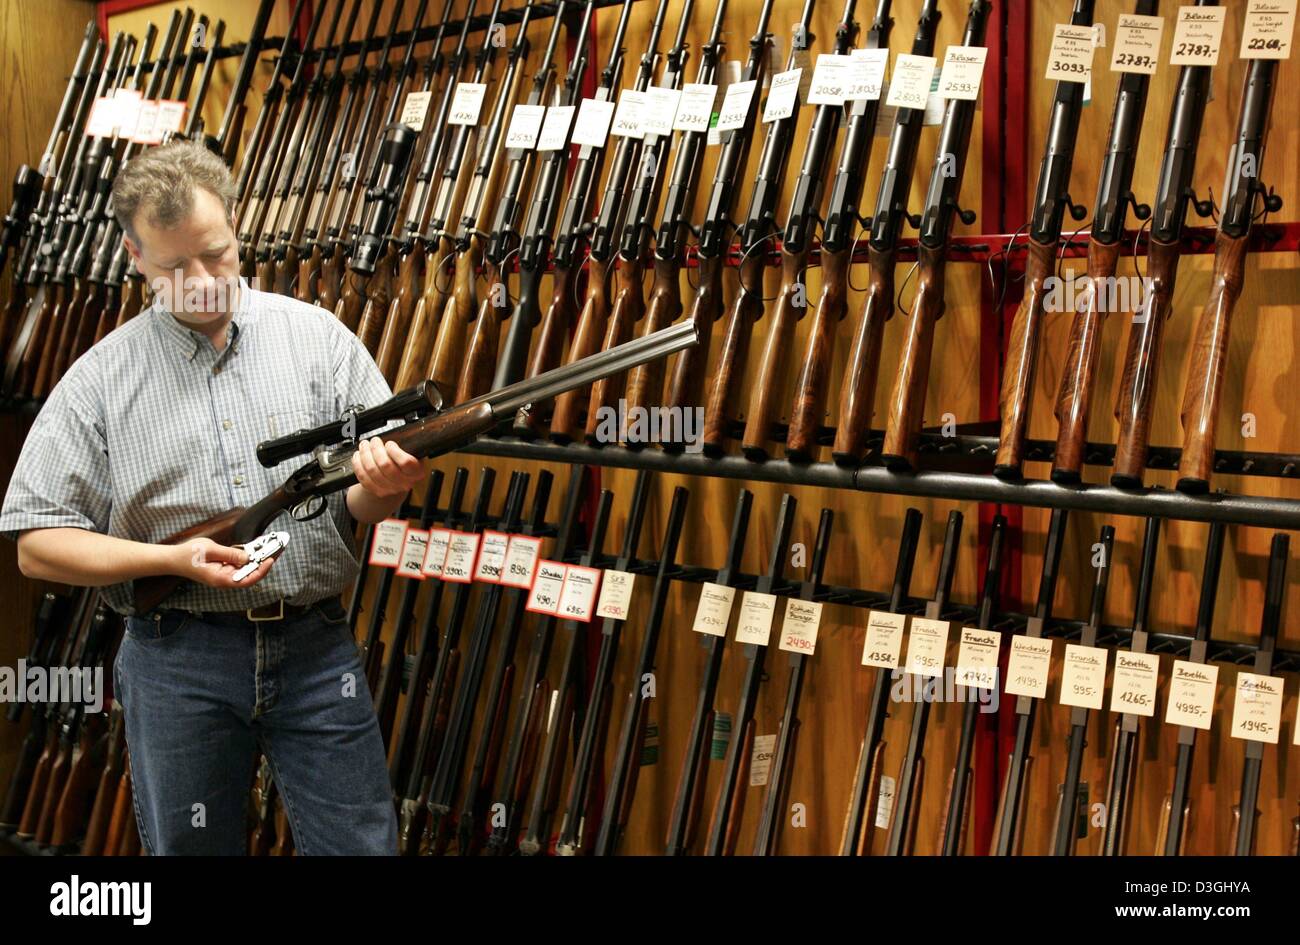 (dpa) - Stefan Knappworst, head of gunsmith Knappworst, inspects a rifle as he stands in front of wall with hunting rifles at the gunsmith's workshop in Braunschweig, Germany, 15 June 2004. There are around 30 traditional gunsmiths left in the state of Lower Saxony. The new gun law requires huntsmen and sports riflemen to keep their rifles locked up in special armour cabinets. Stock Photo